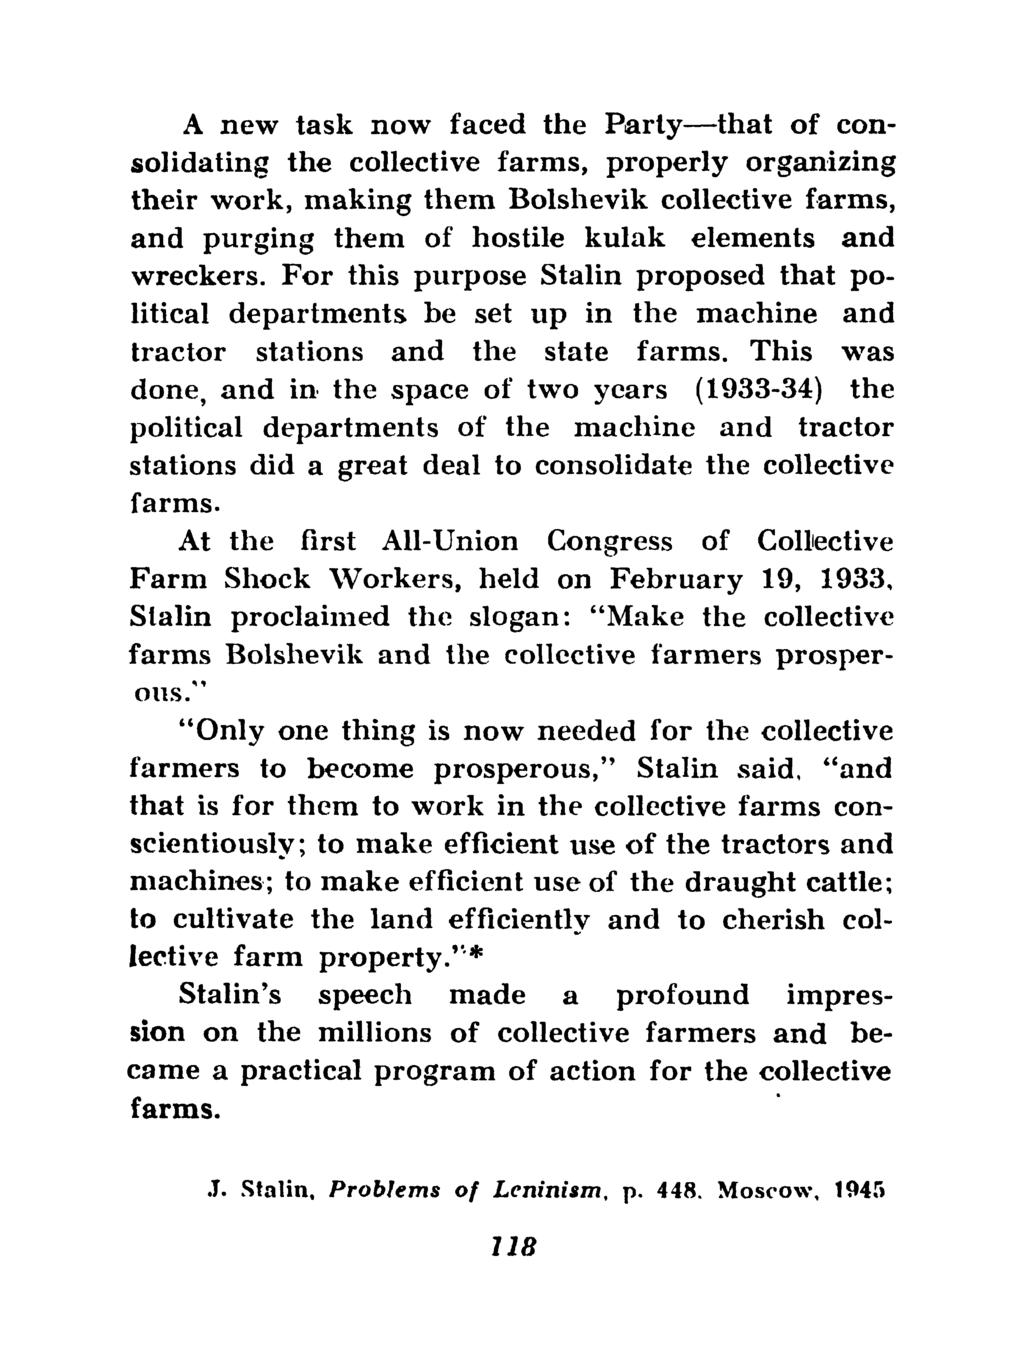 A new task now faced the Party that of consolidating the collective farms, properly organizing their work, making them Bolshevik collective farms, and purging them of hostile kulak elements and